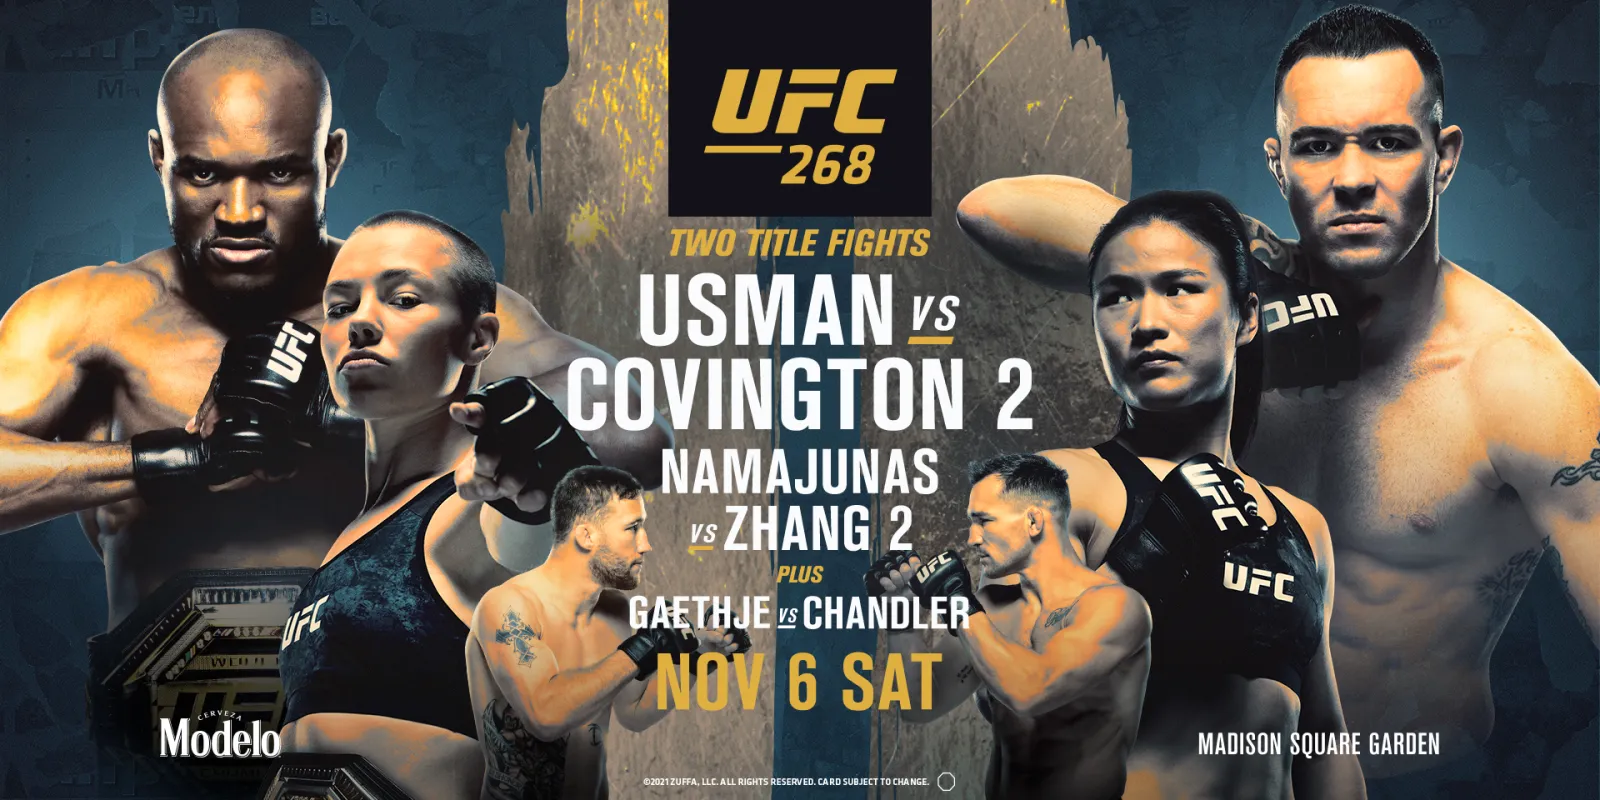 UFC 268 Live stream without Reddit streams and Buffstreams